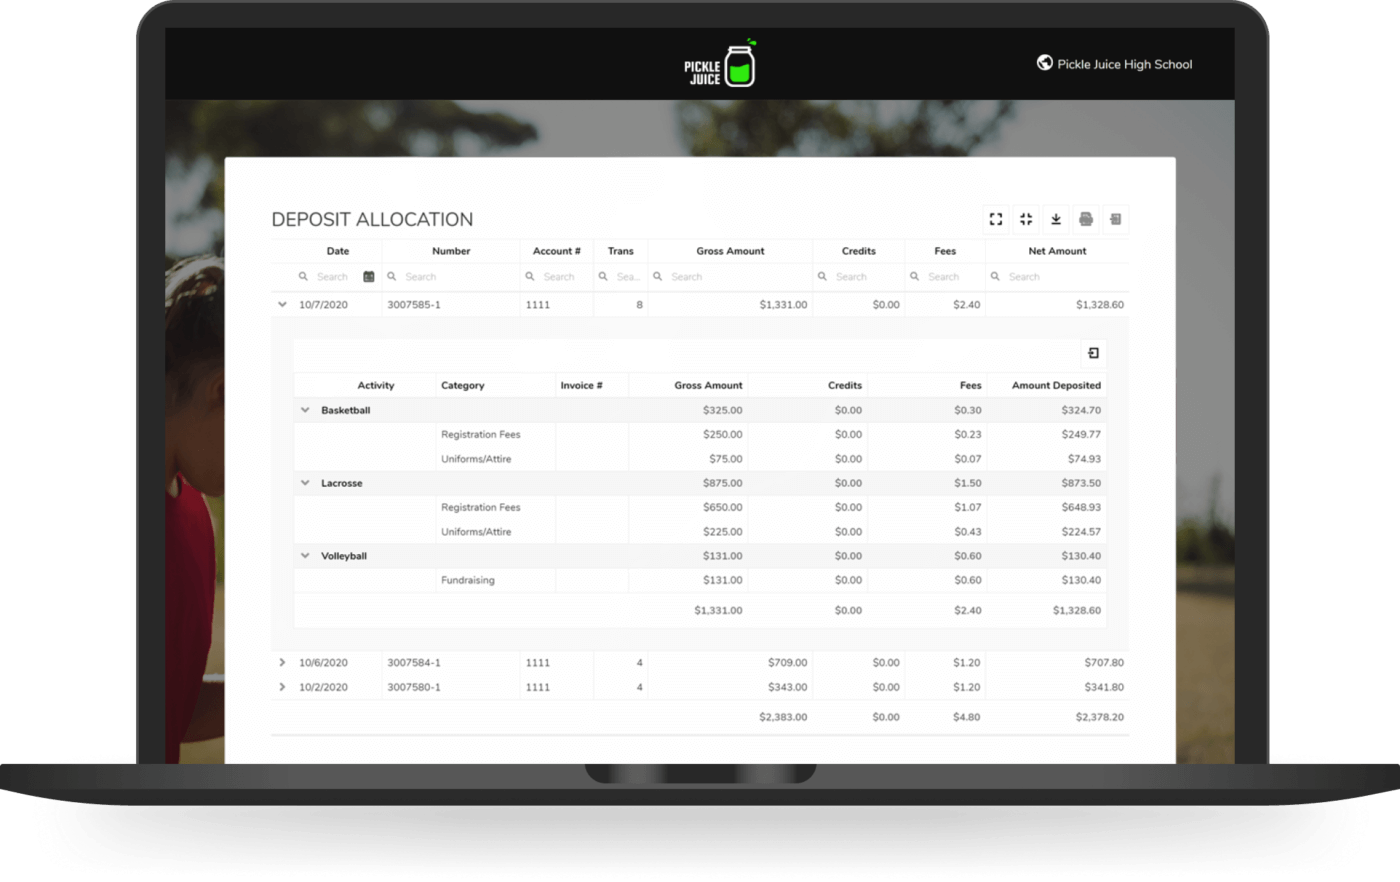 manage team finances with one team deposit report